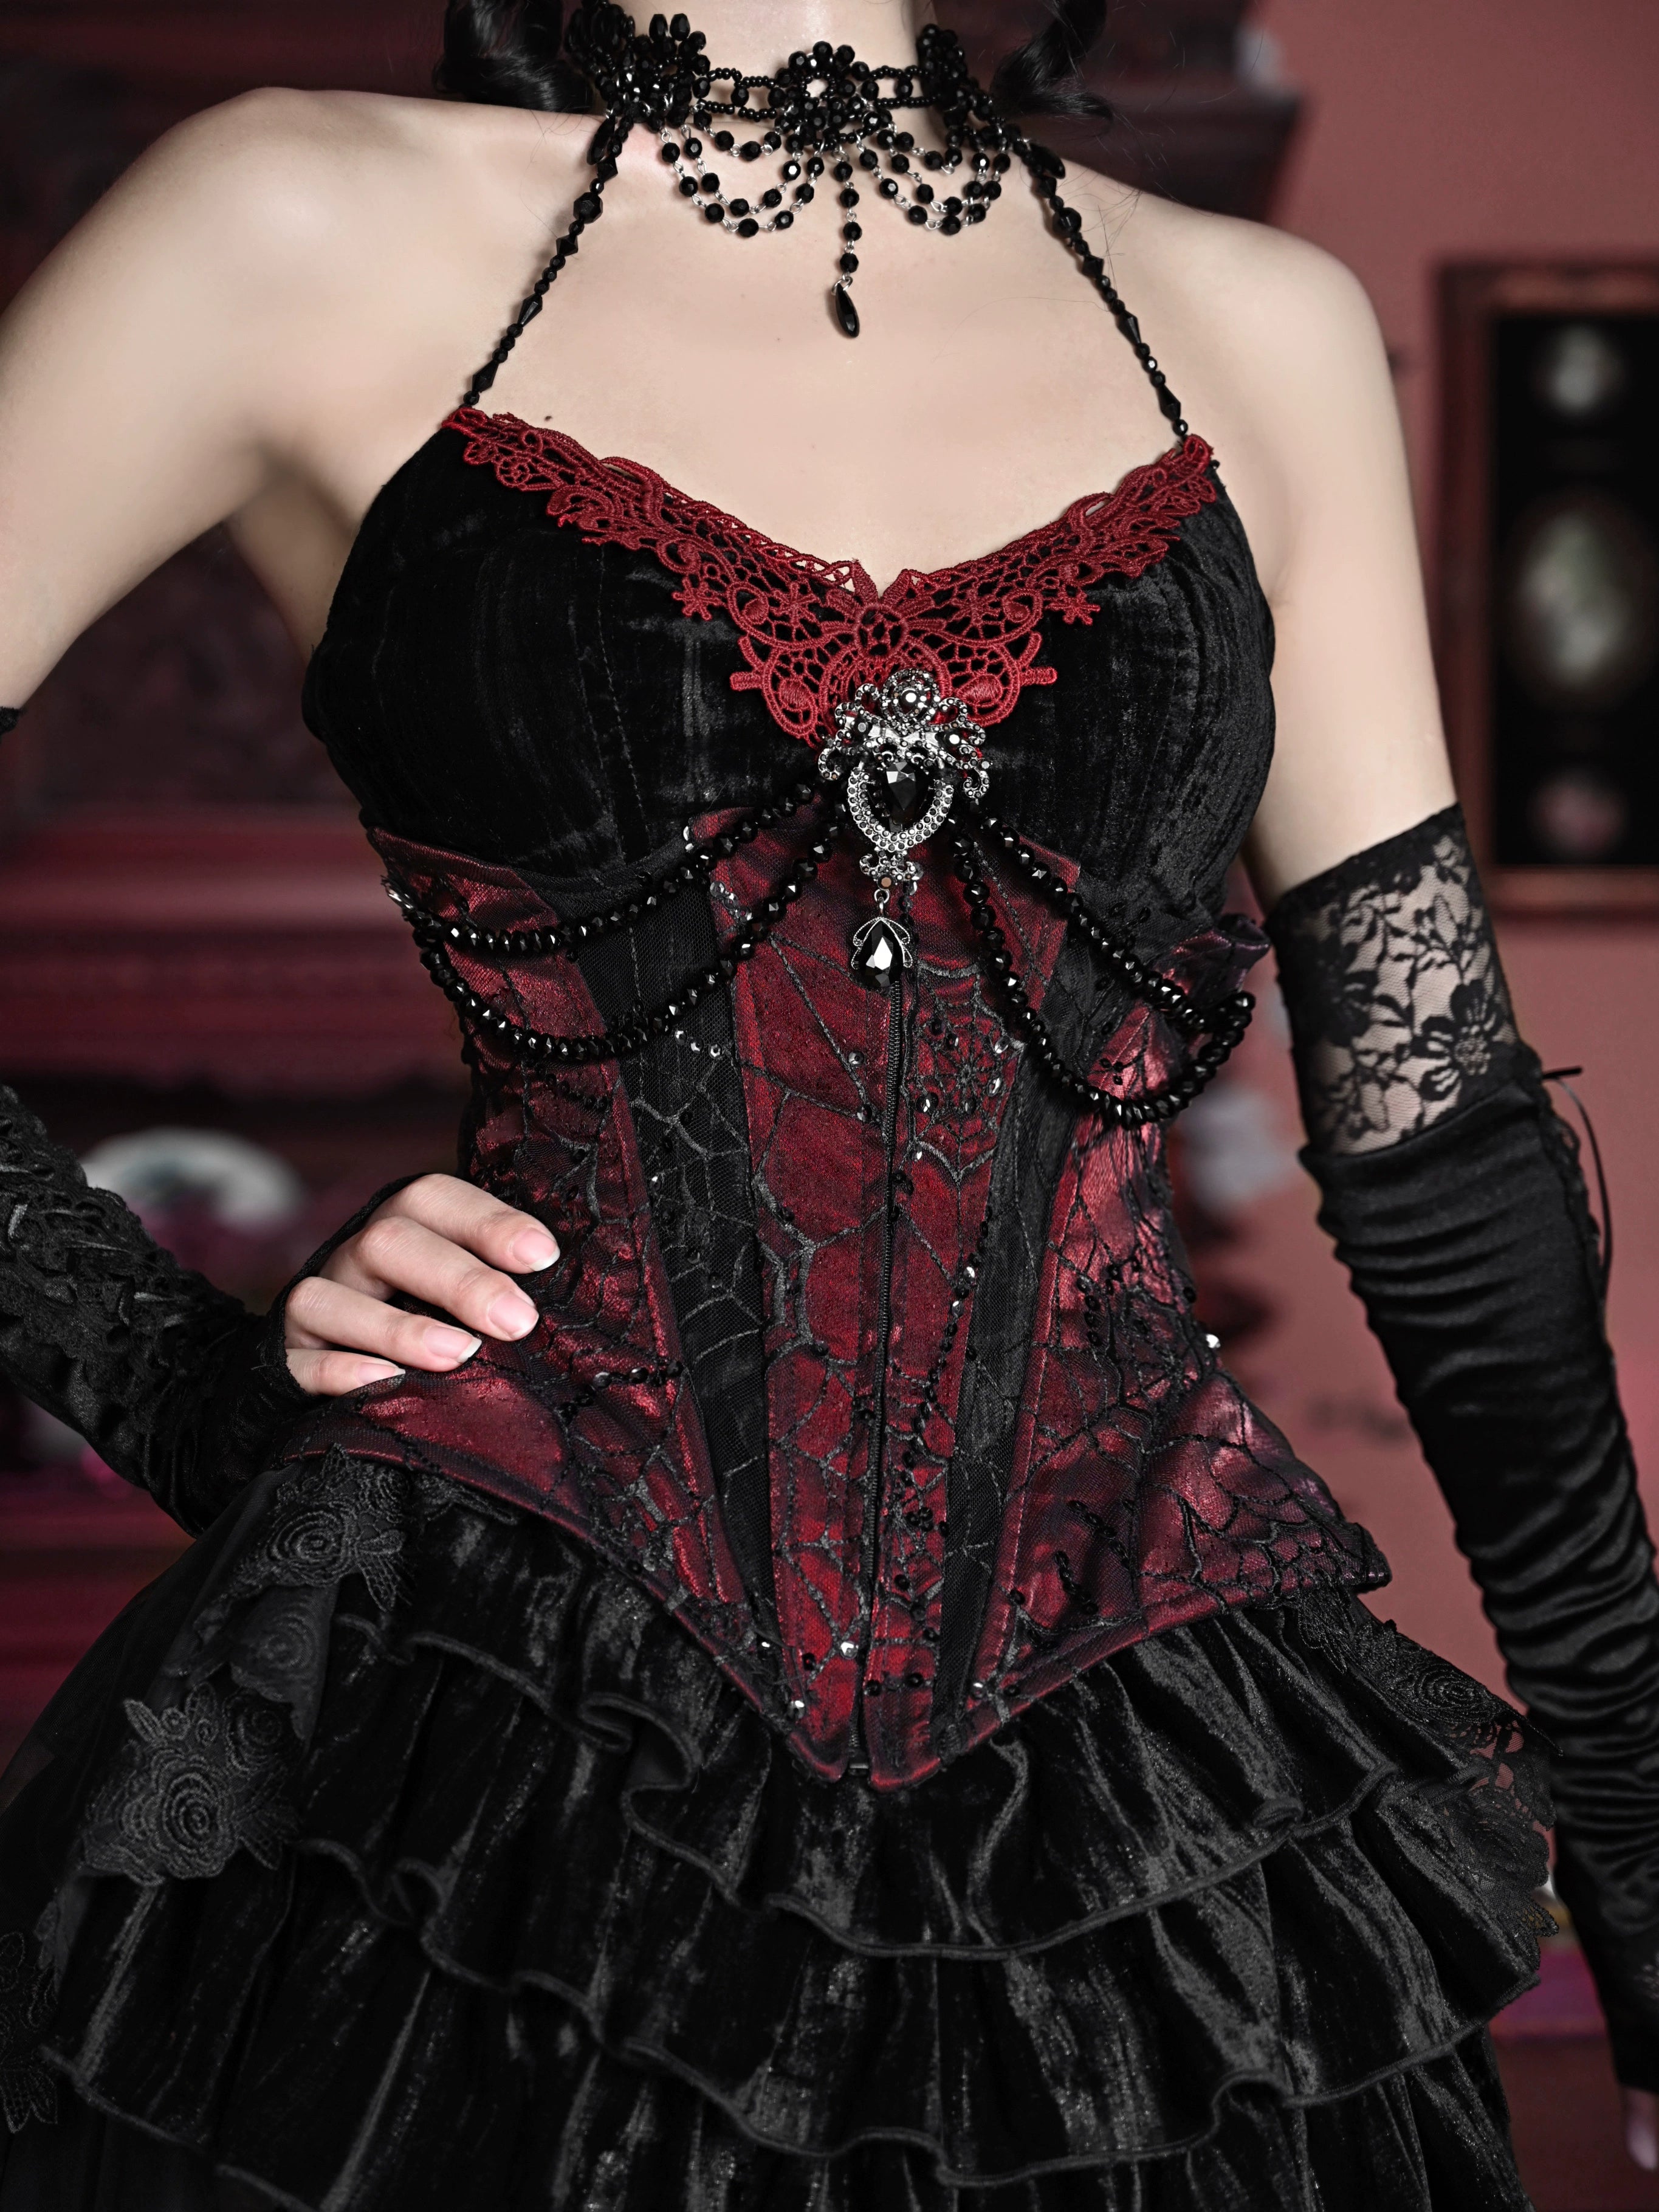 MOVING SALE Morbid Threads Rare Black & Red Velvet Lace Up Gothic Corset  Top